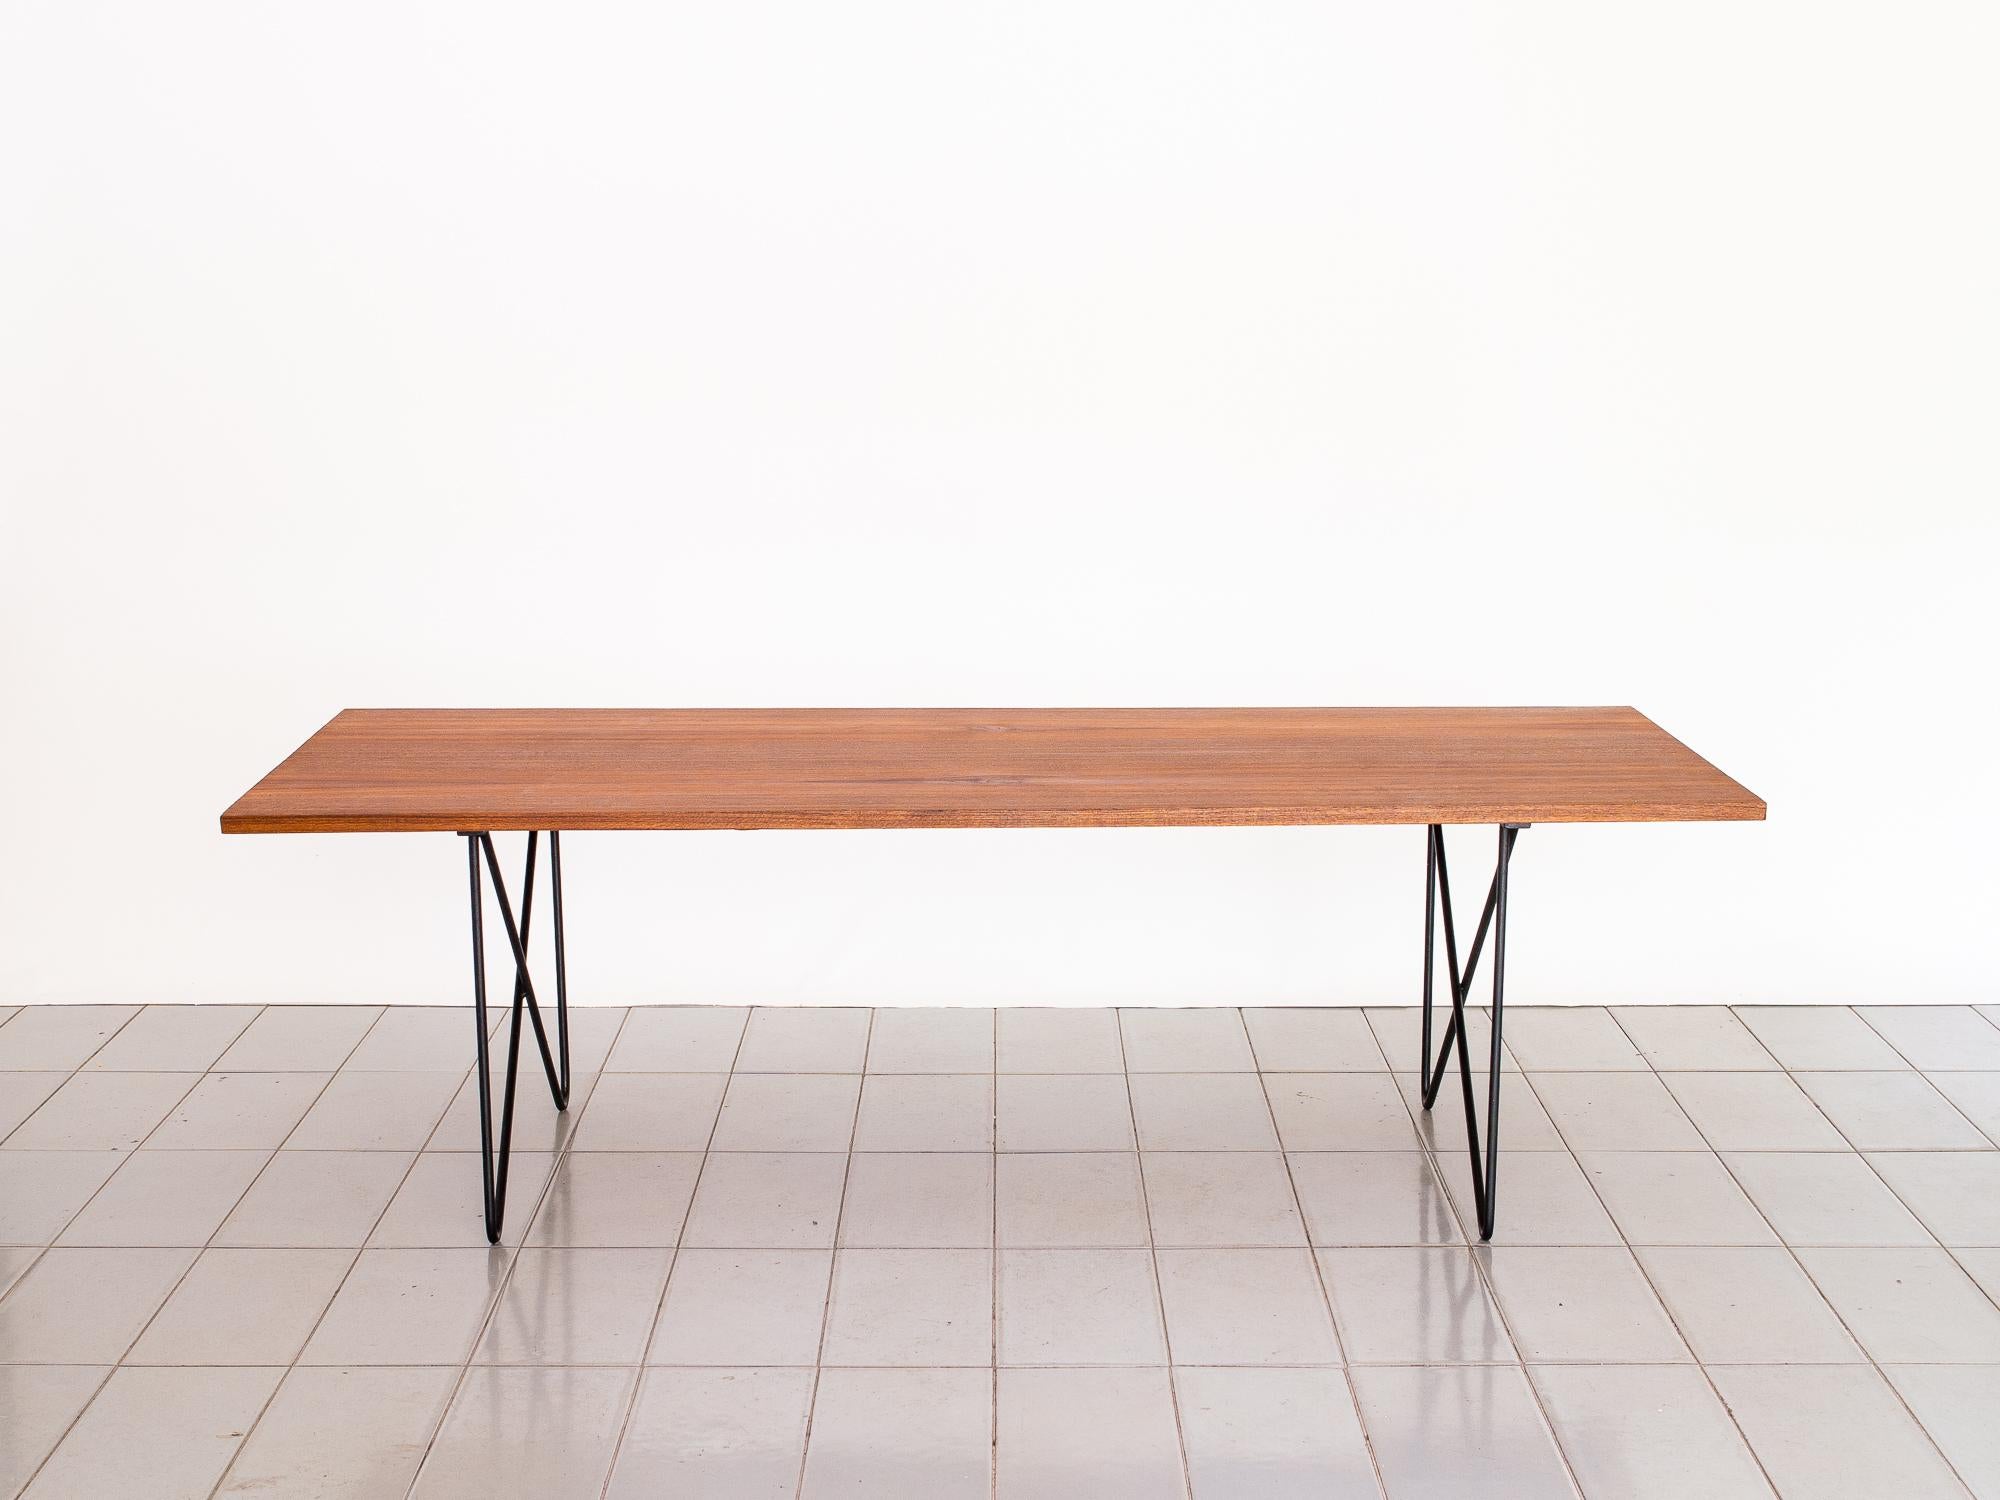 This great and lightweight piece is fully veneered in Asian teak, and have beautiful crossing legs as base. The attribution to Ernesto Hauner comes from the design of the legs, very usual of his super brief independent production before opening his